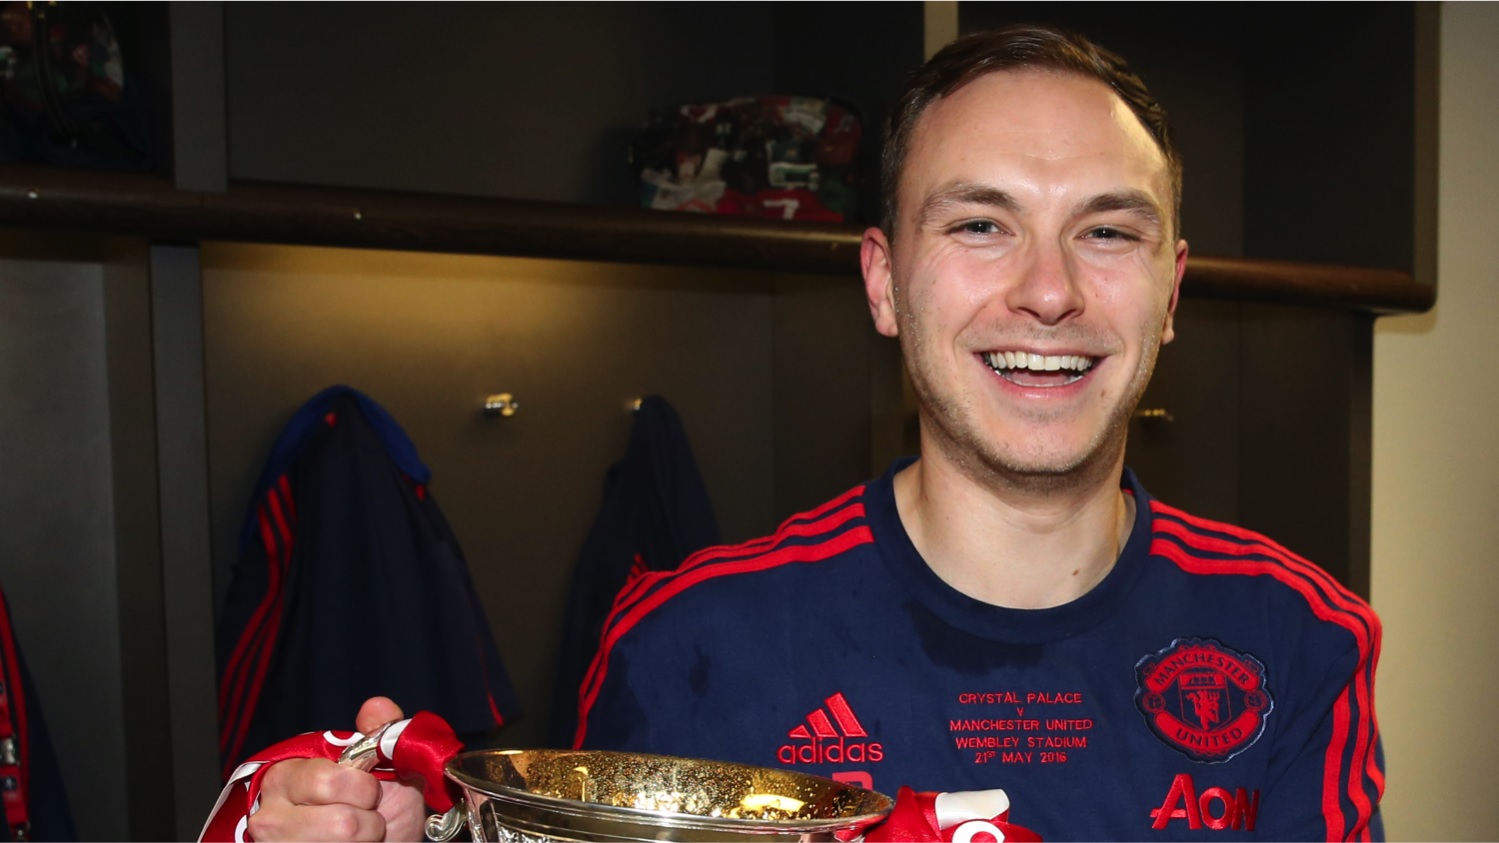 A photo of Paul Brand in Manchester United kit holding a trophy